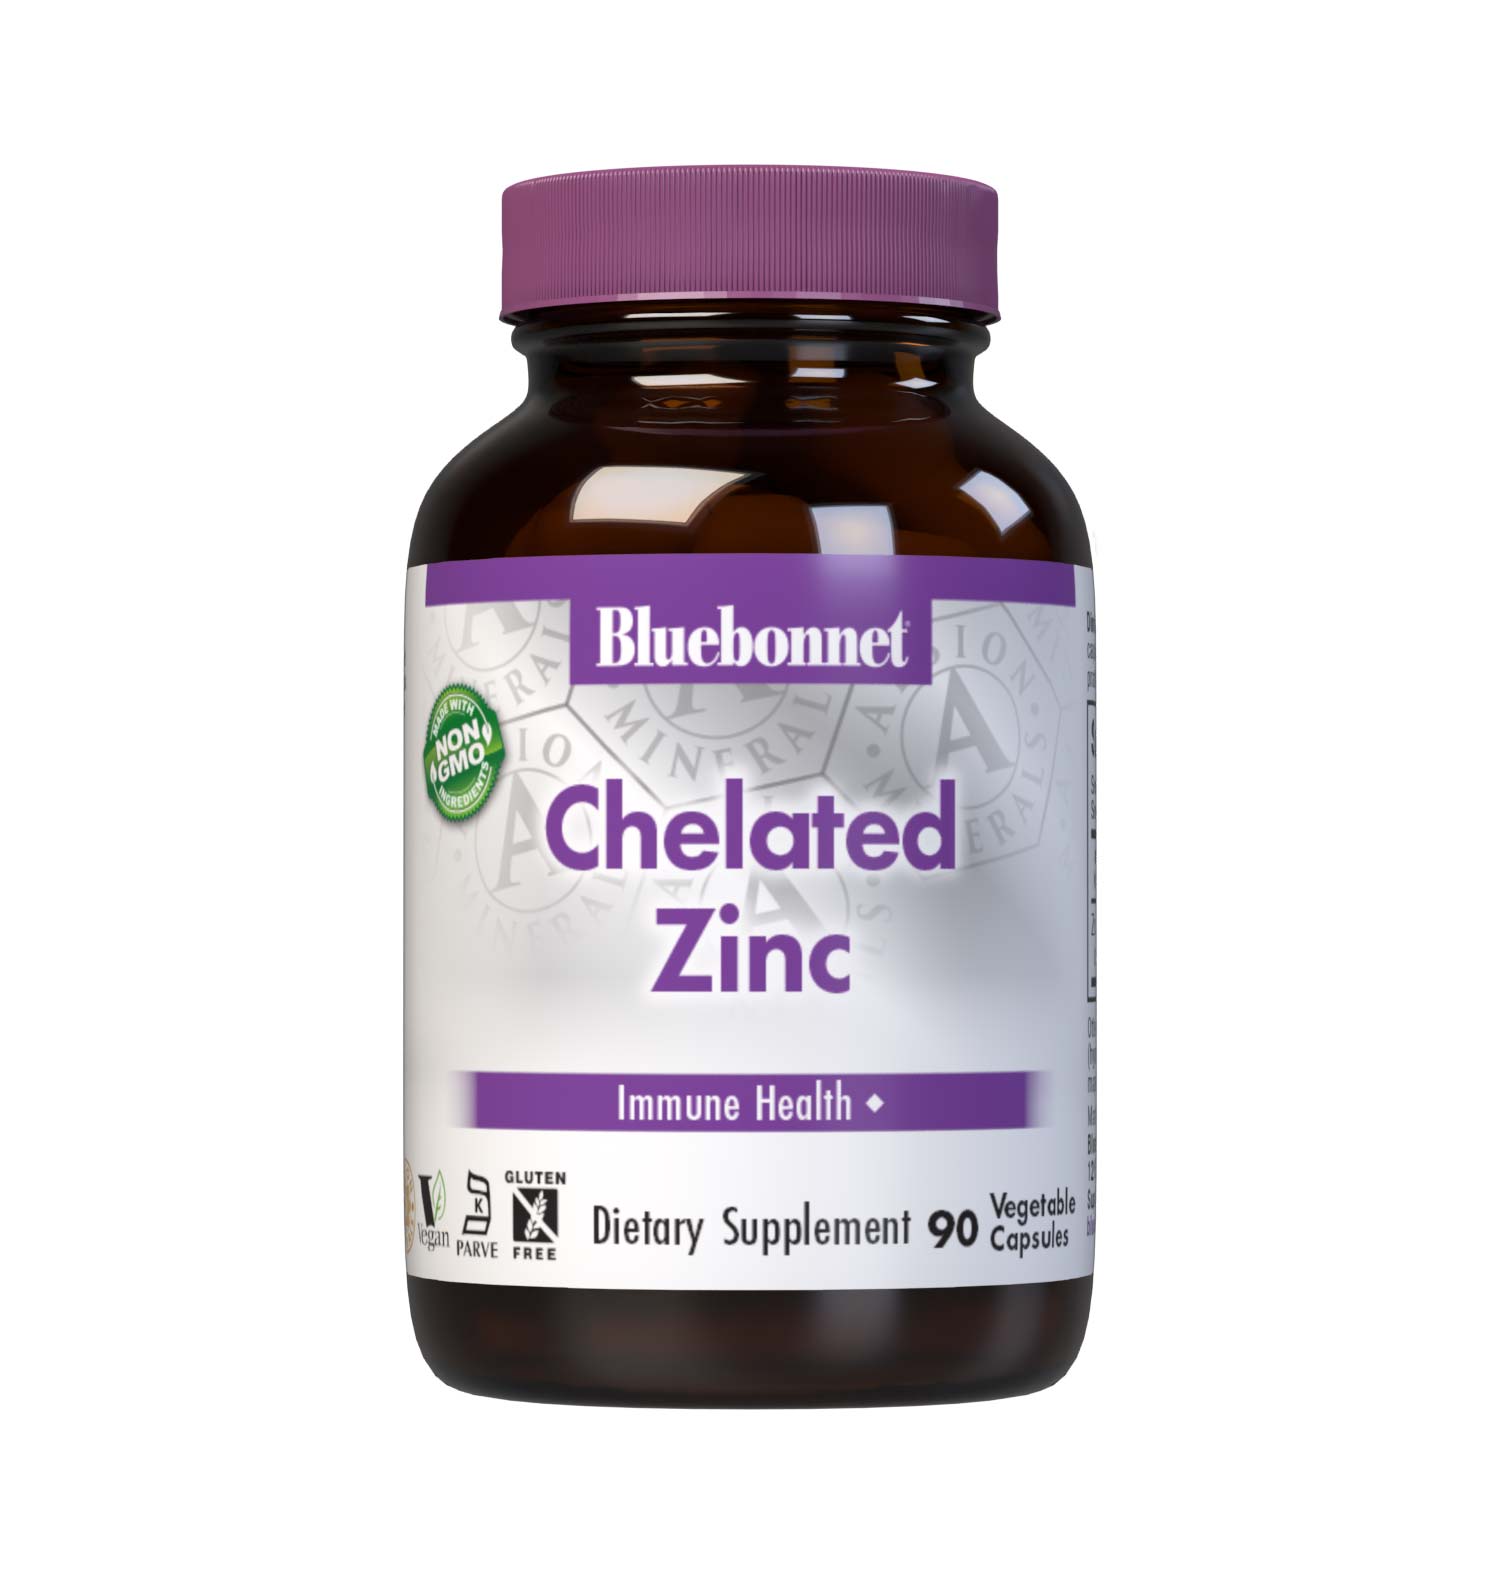 Bluebonnet's Chelated Zinc 90 Vegetable Capsules are formulated with 30 mg of elemental zinc from fully reacted zinc bisglycinate, an amino acid chelate mineral from Albion. Zinc is an essential element that is necessary for immune health and enzyme function. #size_90 count